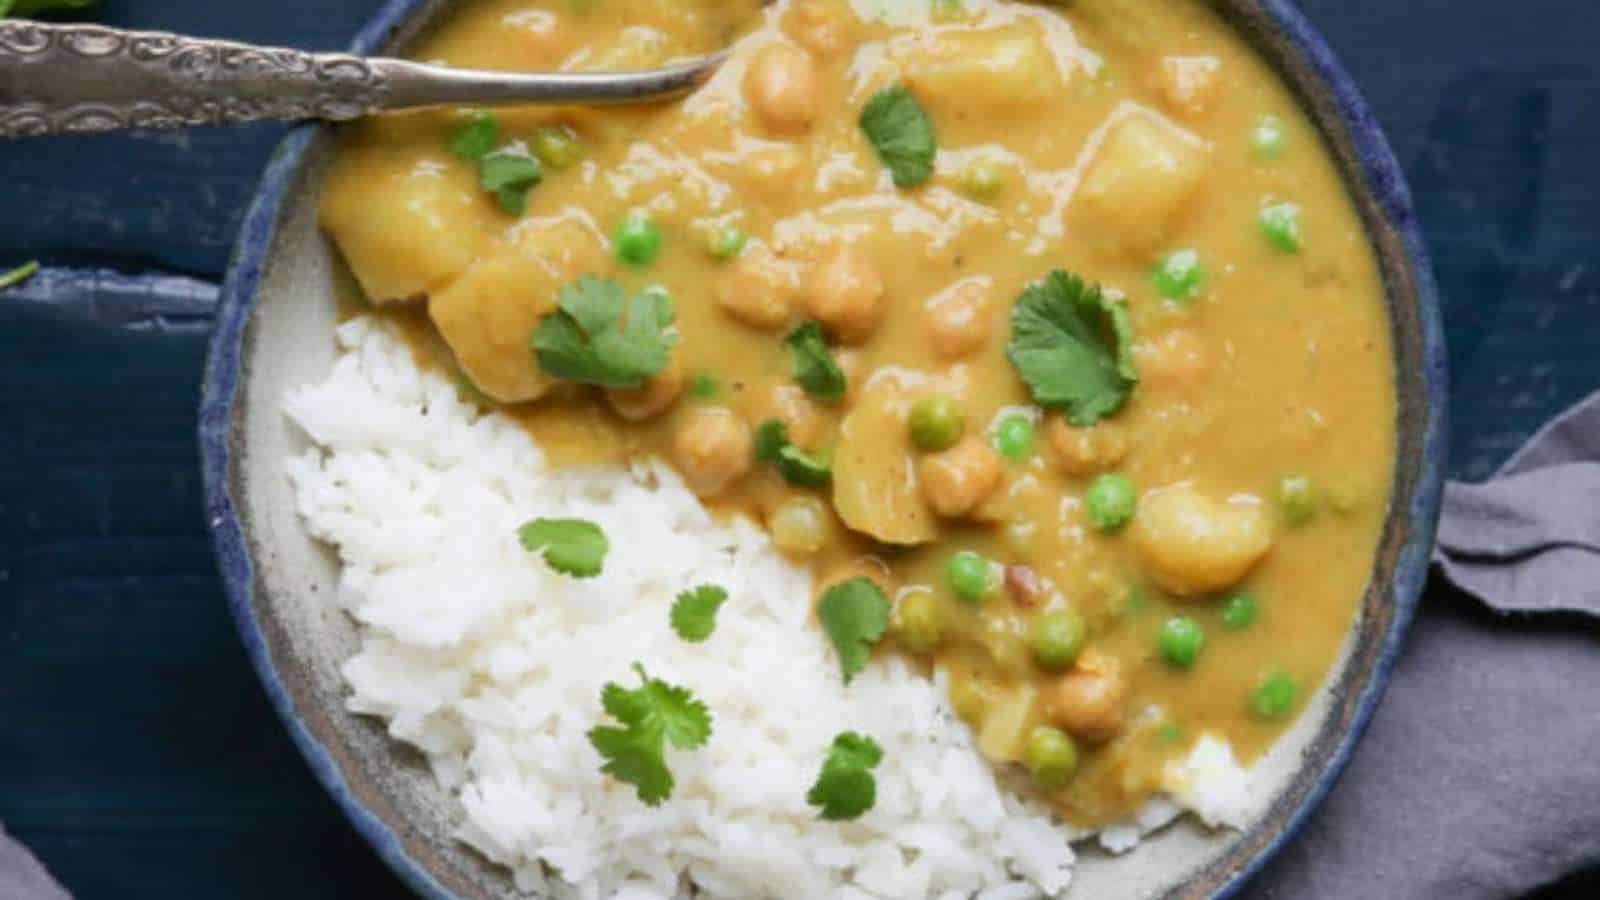 A bowl of curry with rice and peas.